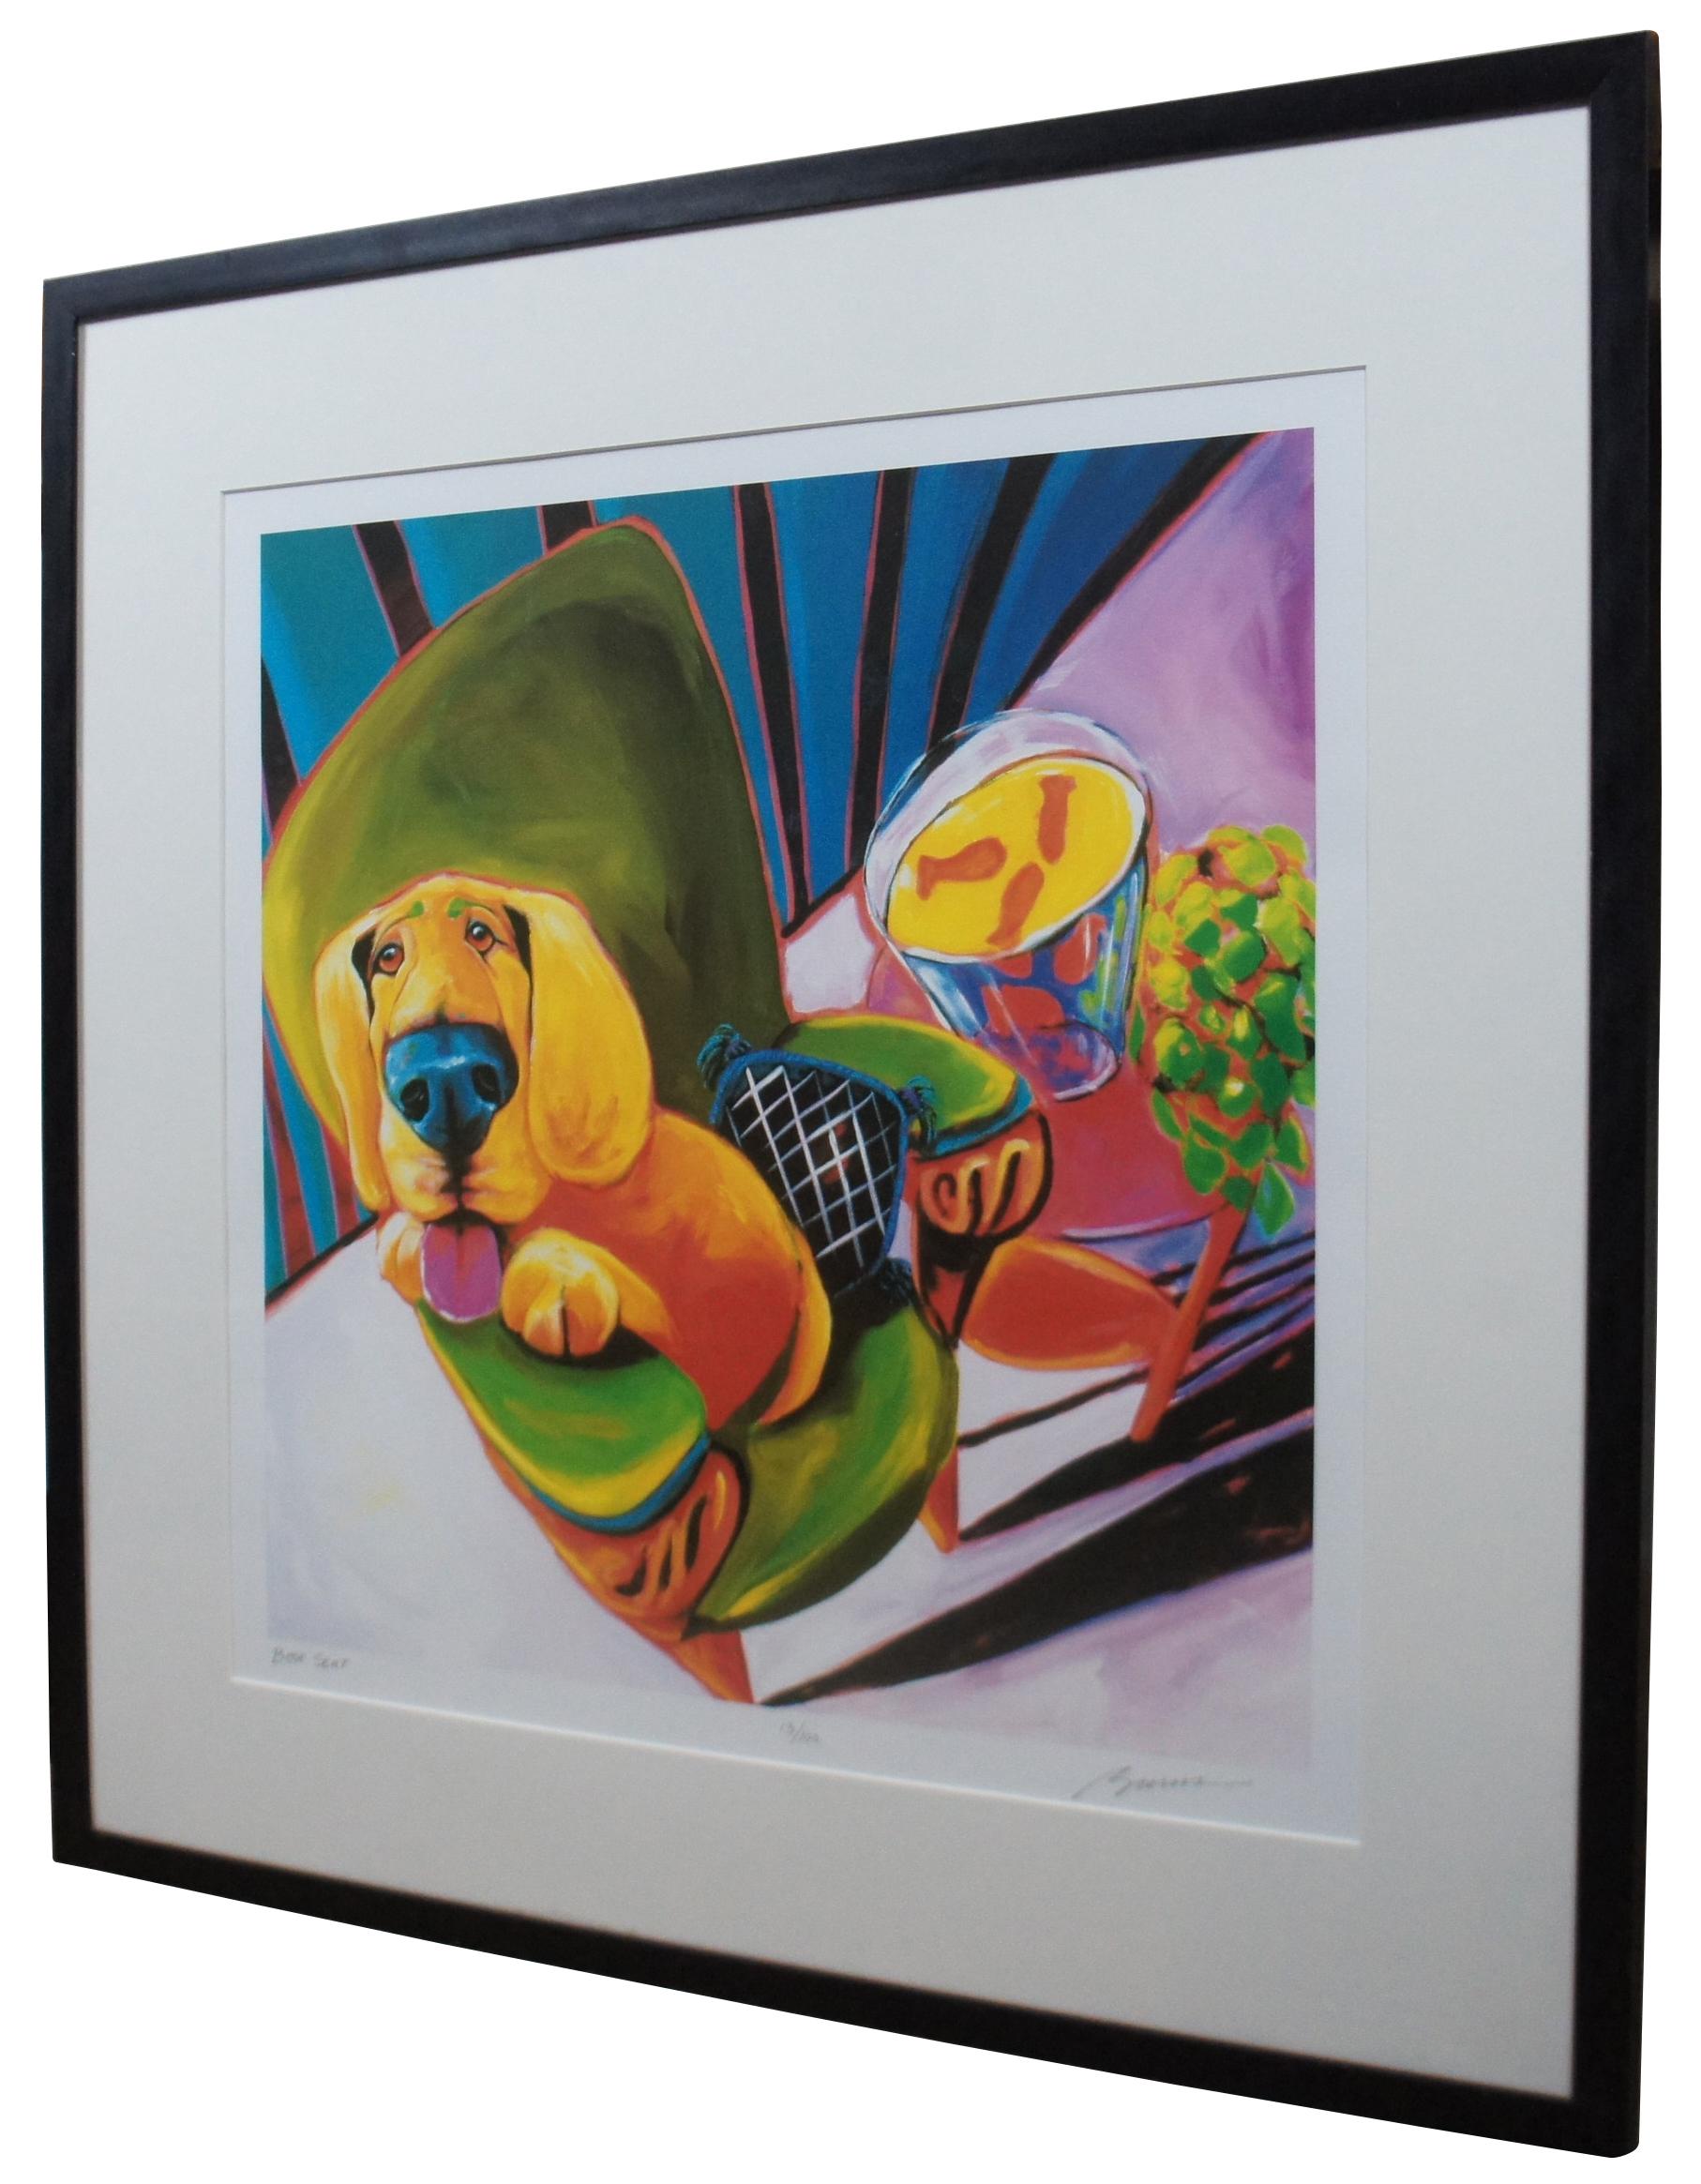 Limited edition whimsical expressionist style lithograph print by Ron Burns titled “Best Seat,” showing a golden dog seated in a green chair; pencil signed and numbered 13/100. “A painter of boldly colored, semi abstract animals, he was the